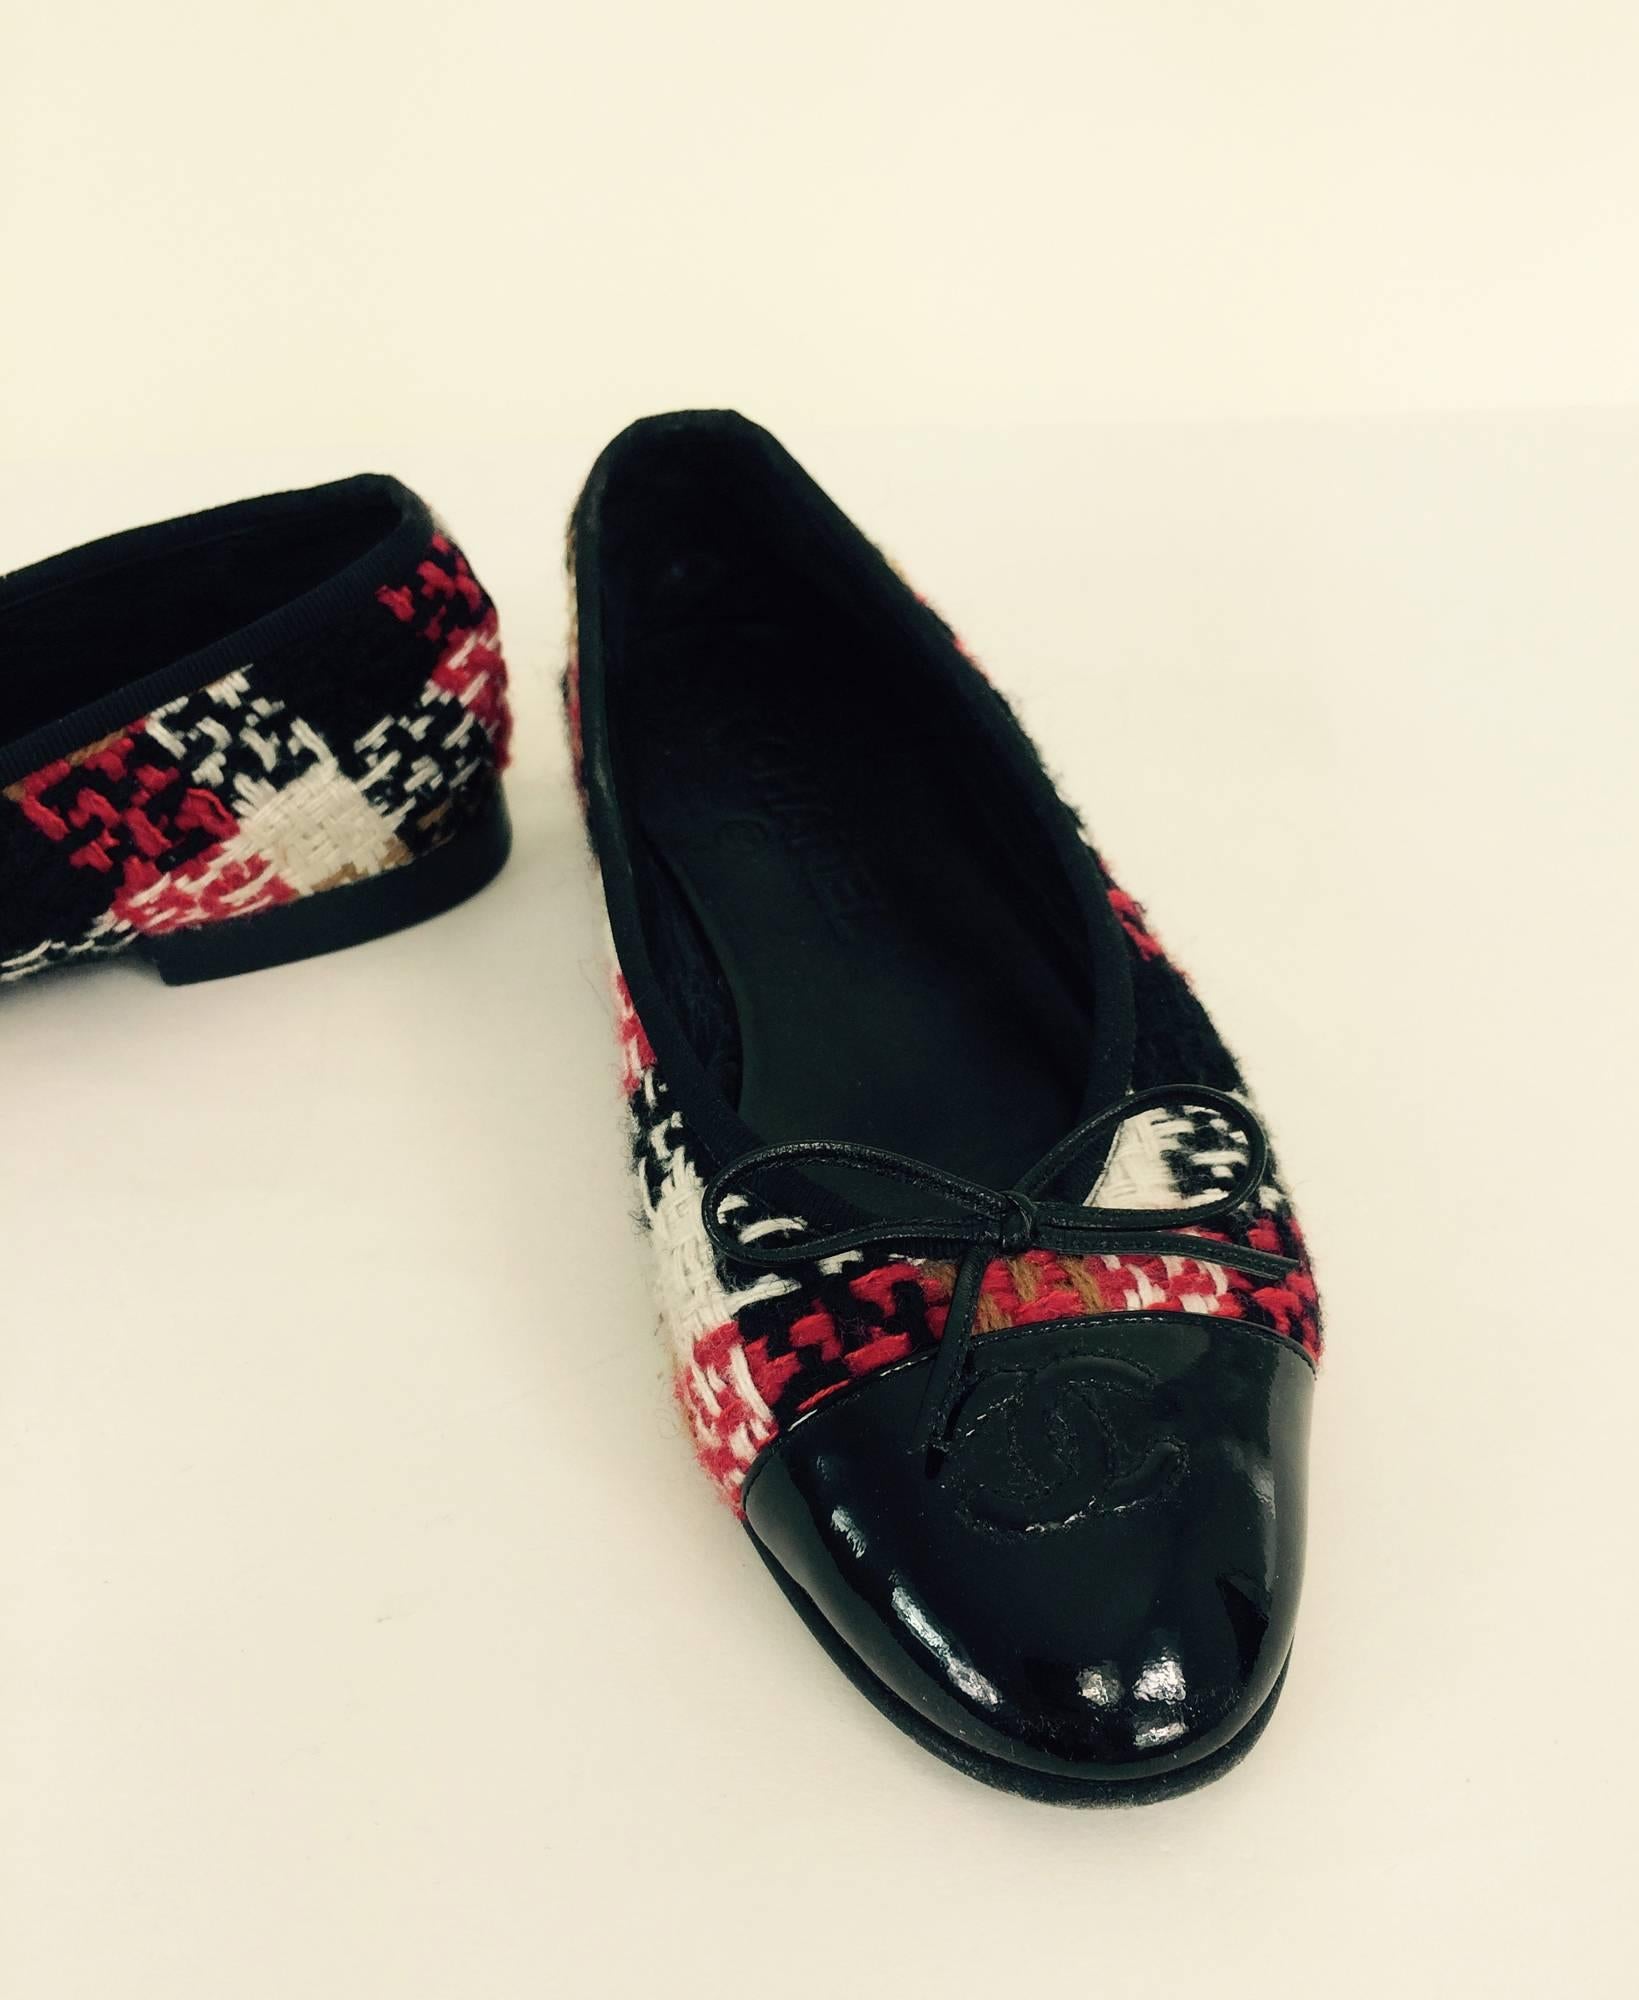 Black Chanel plaid tweed & patent leather ballet flats  37